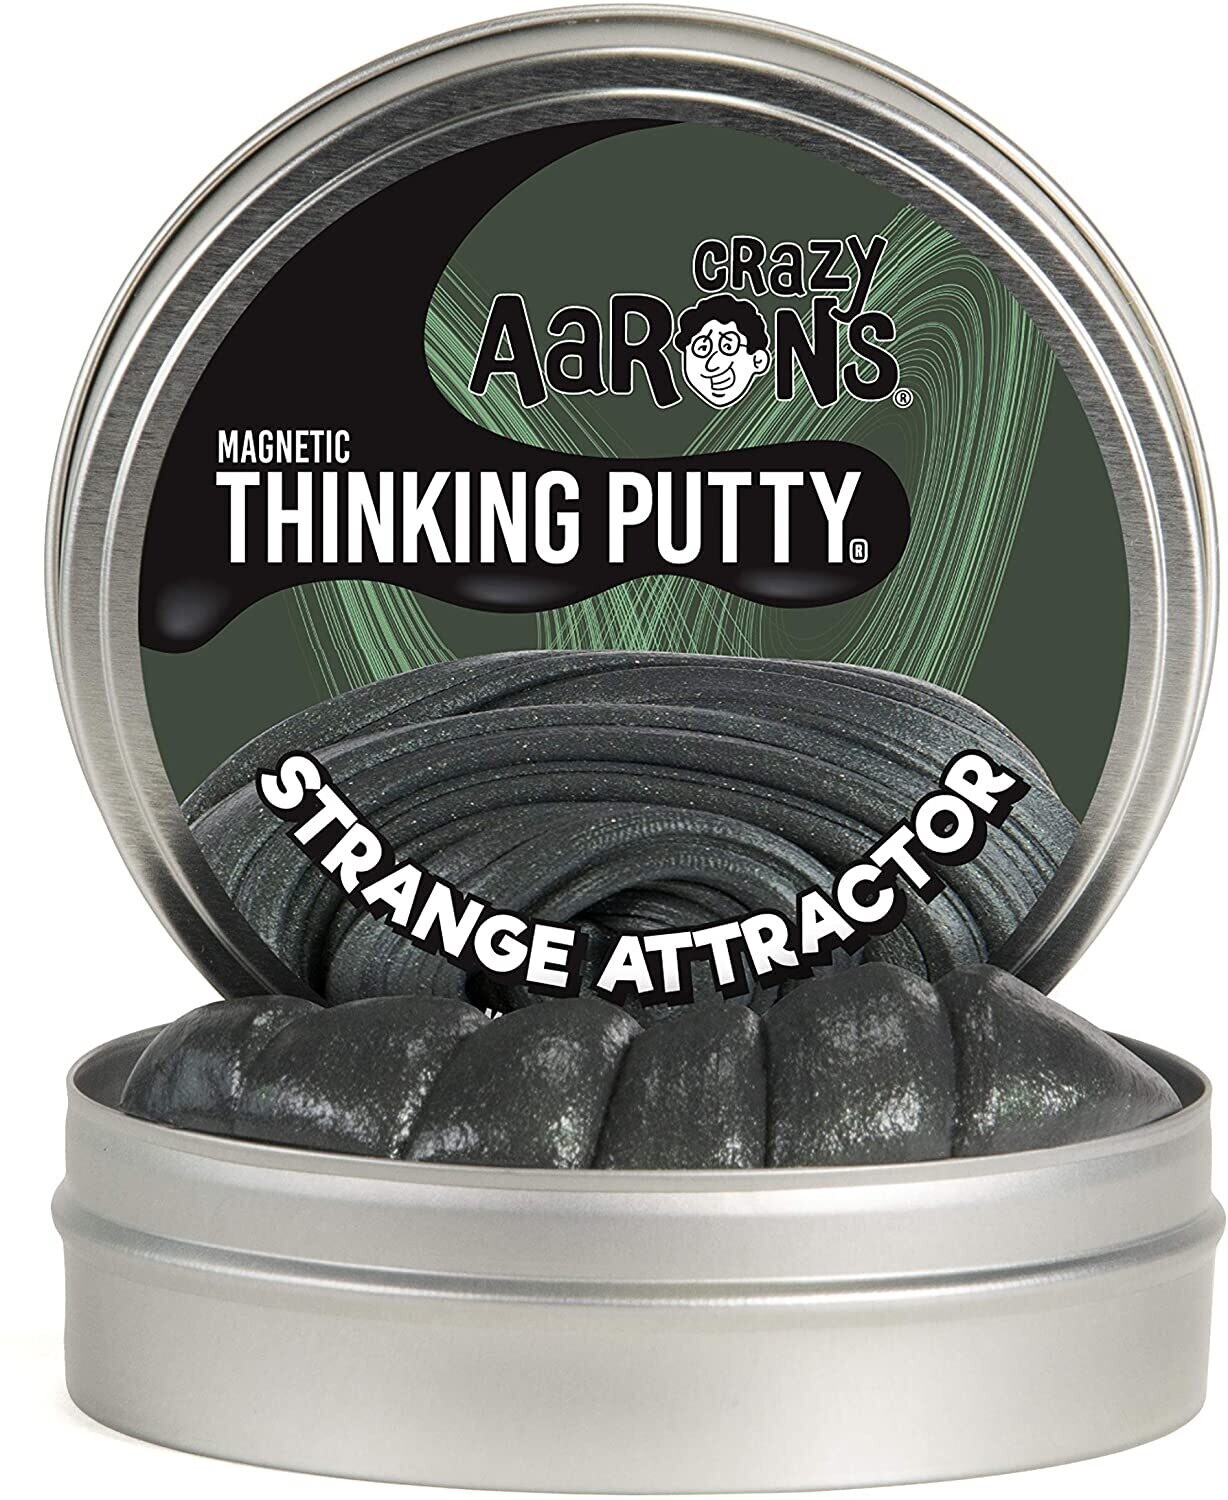 Crazy Aaron's Thinking Putty Magnetic Storms Strange Attractor